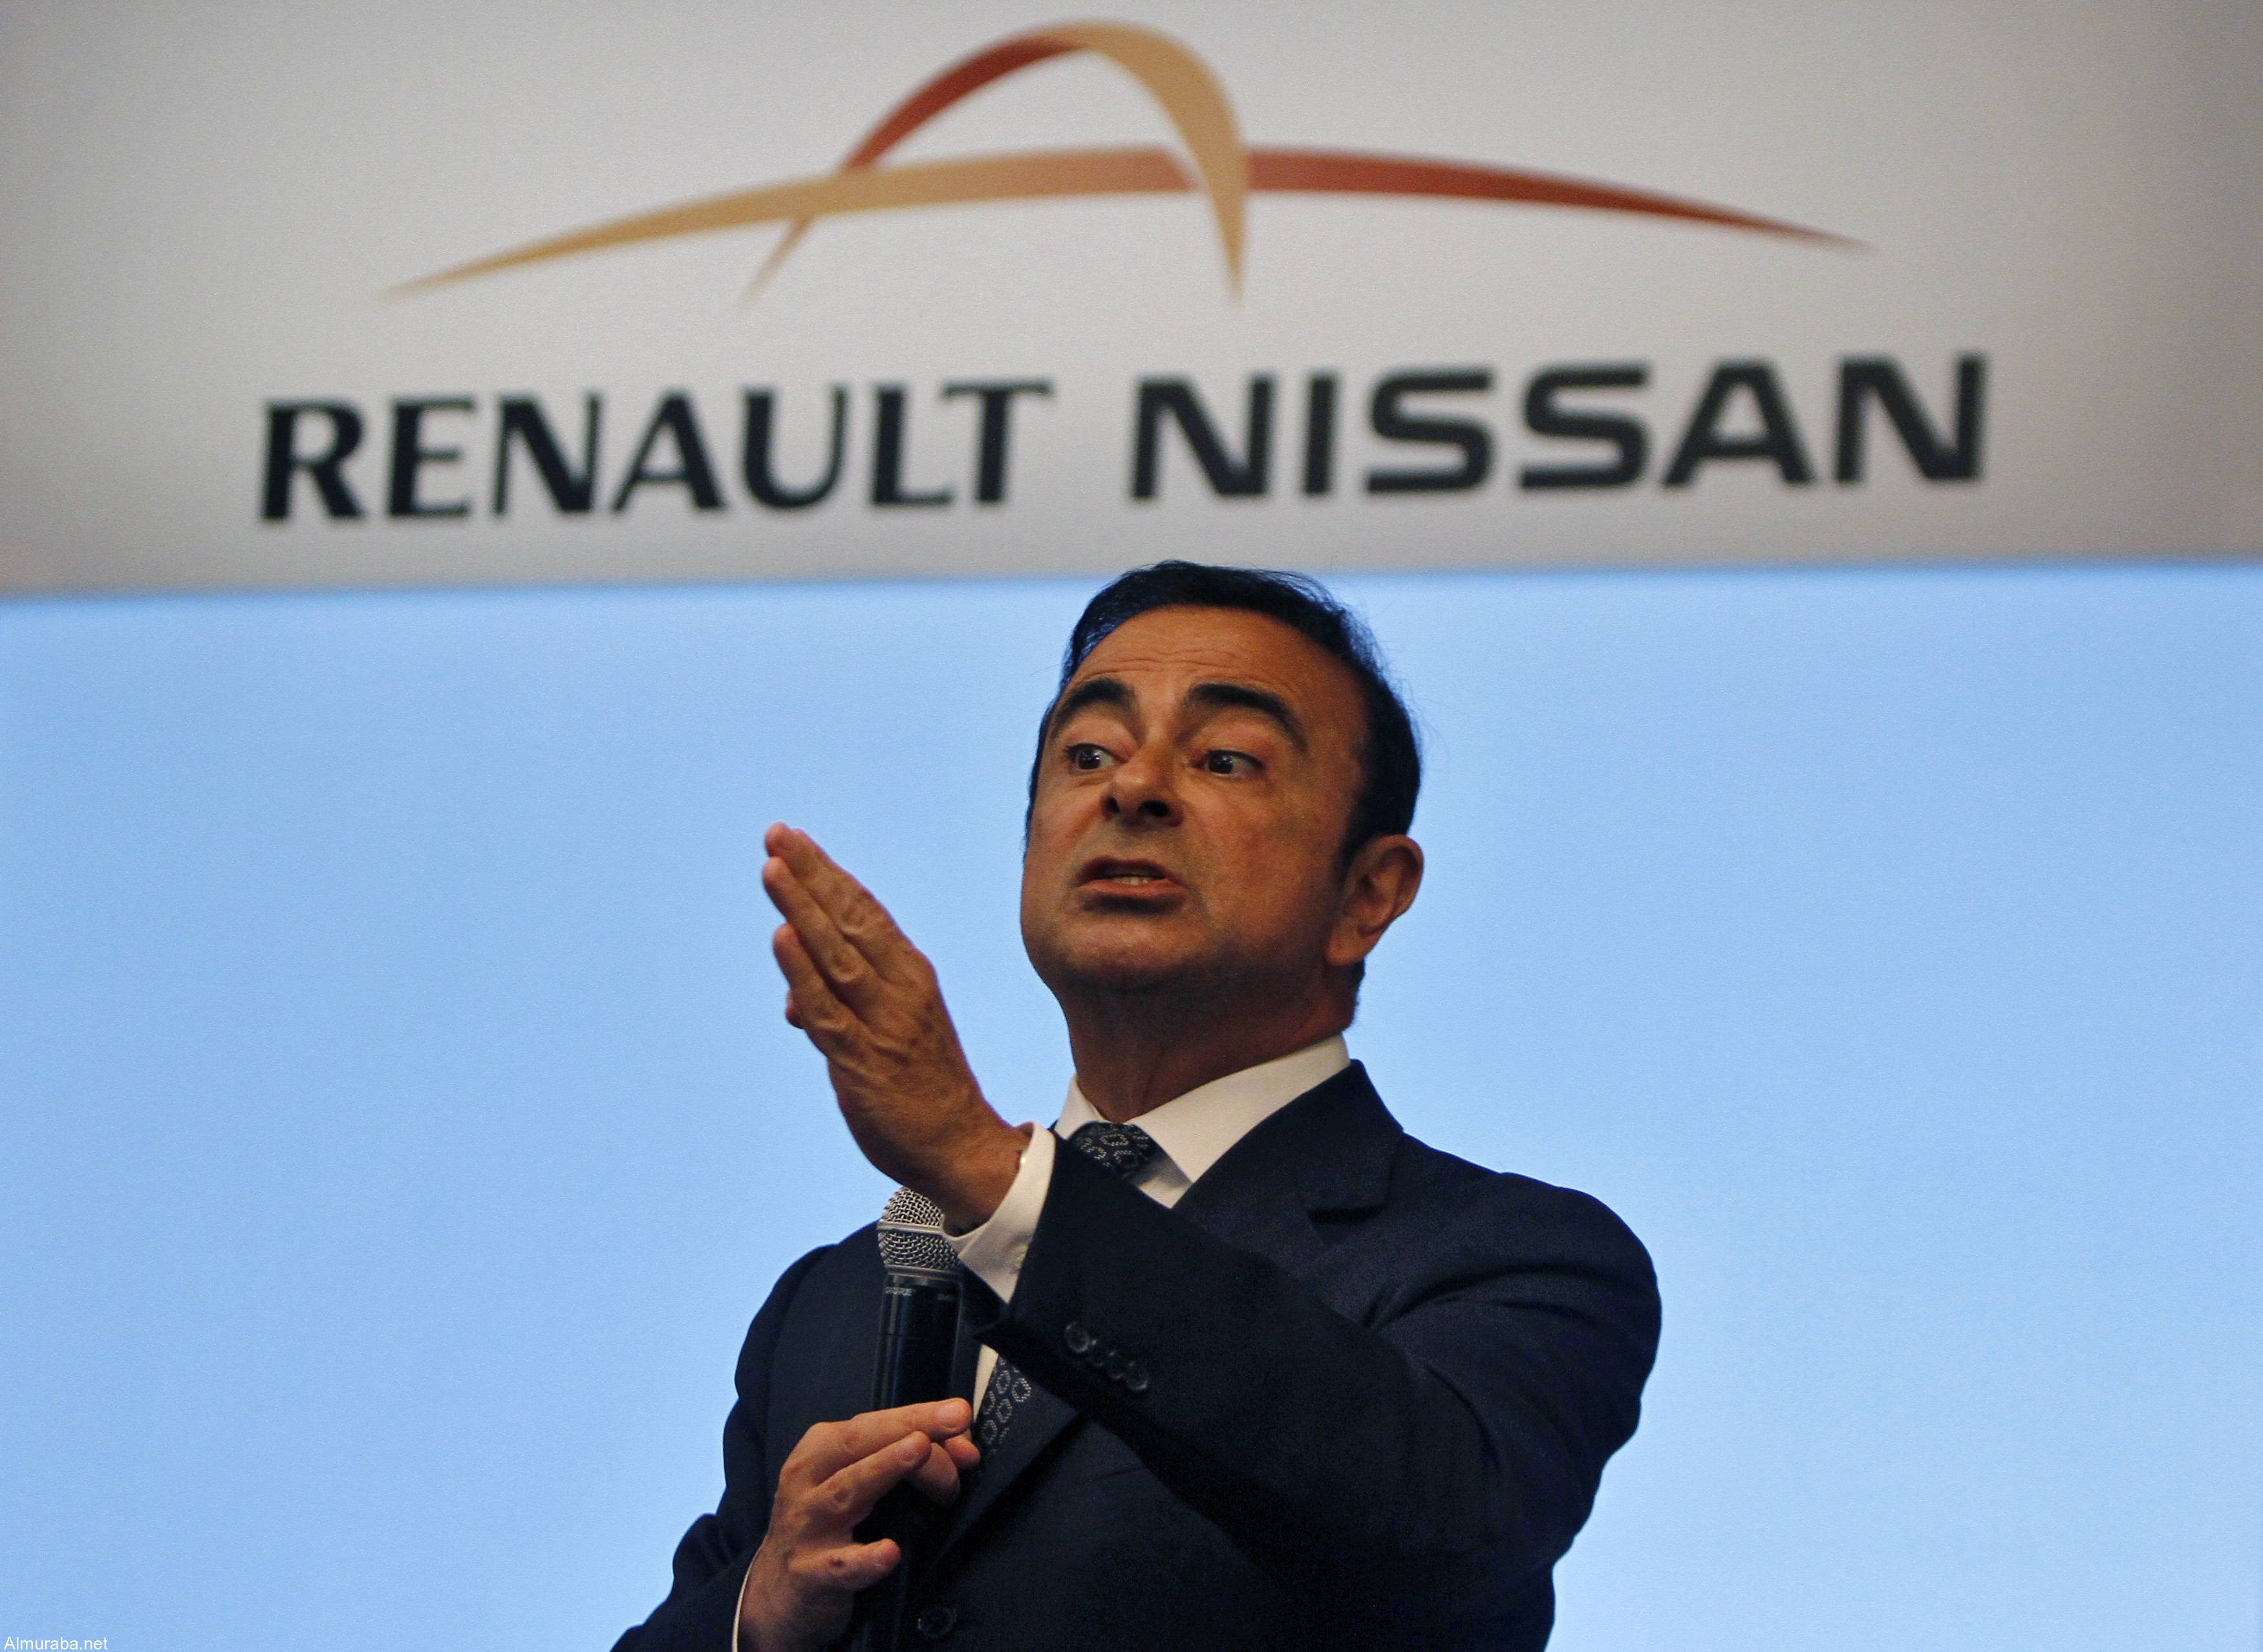 Carlos Ghosn, chairman and CEO of the Renault-Nissan Alliance, gestures as he speaks at a news conference in Chennai